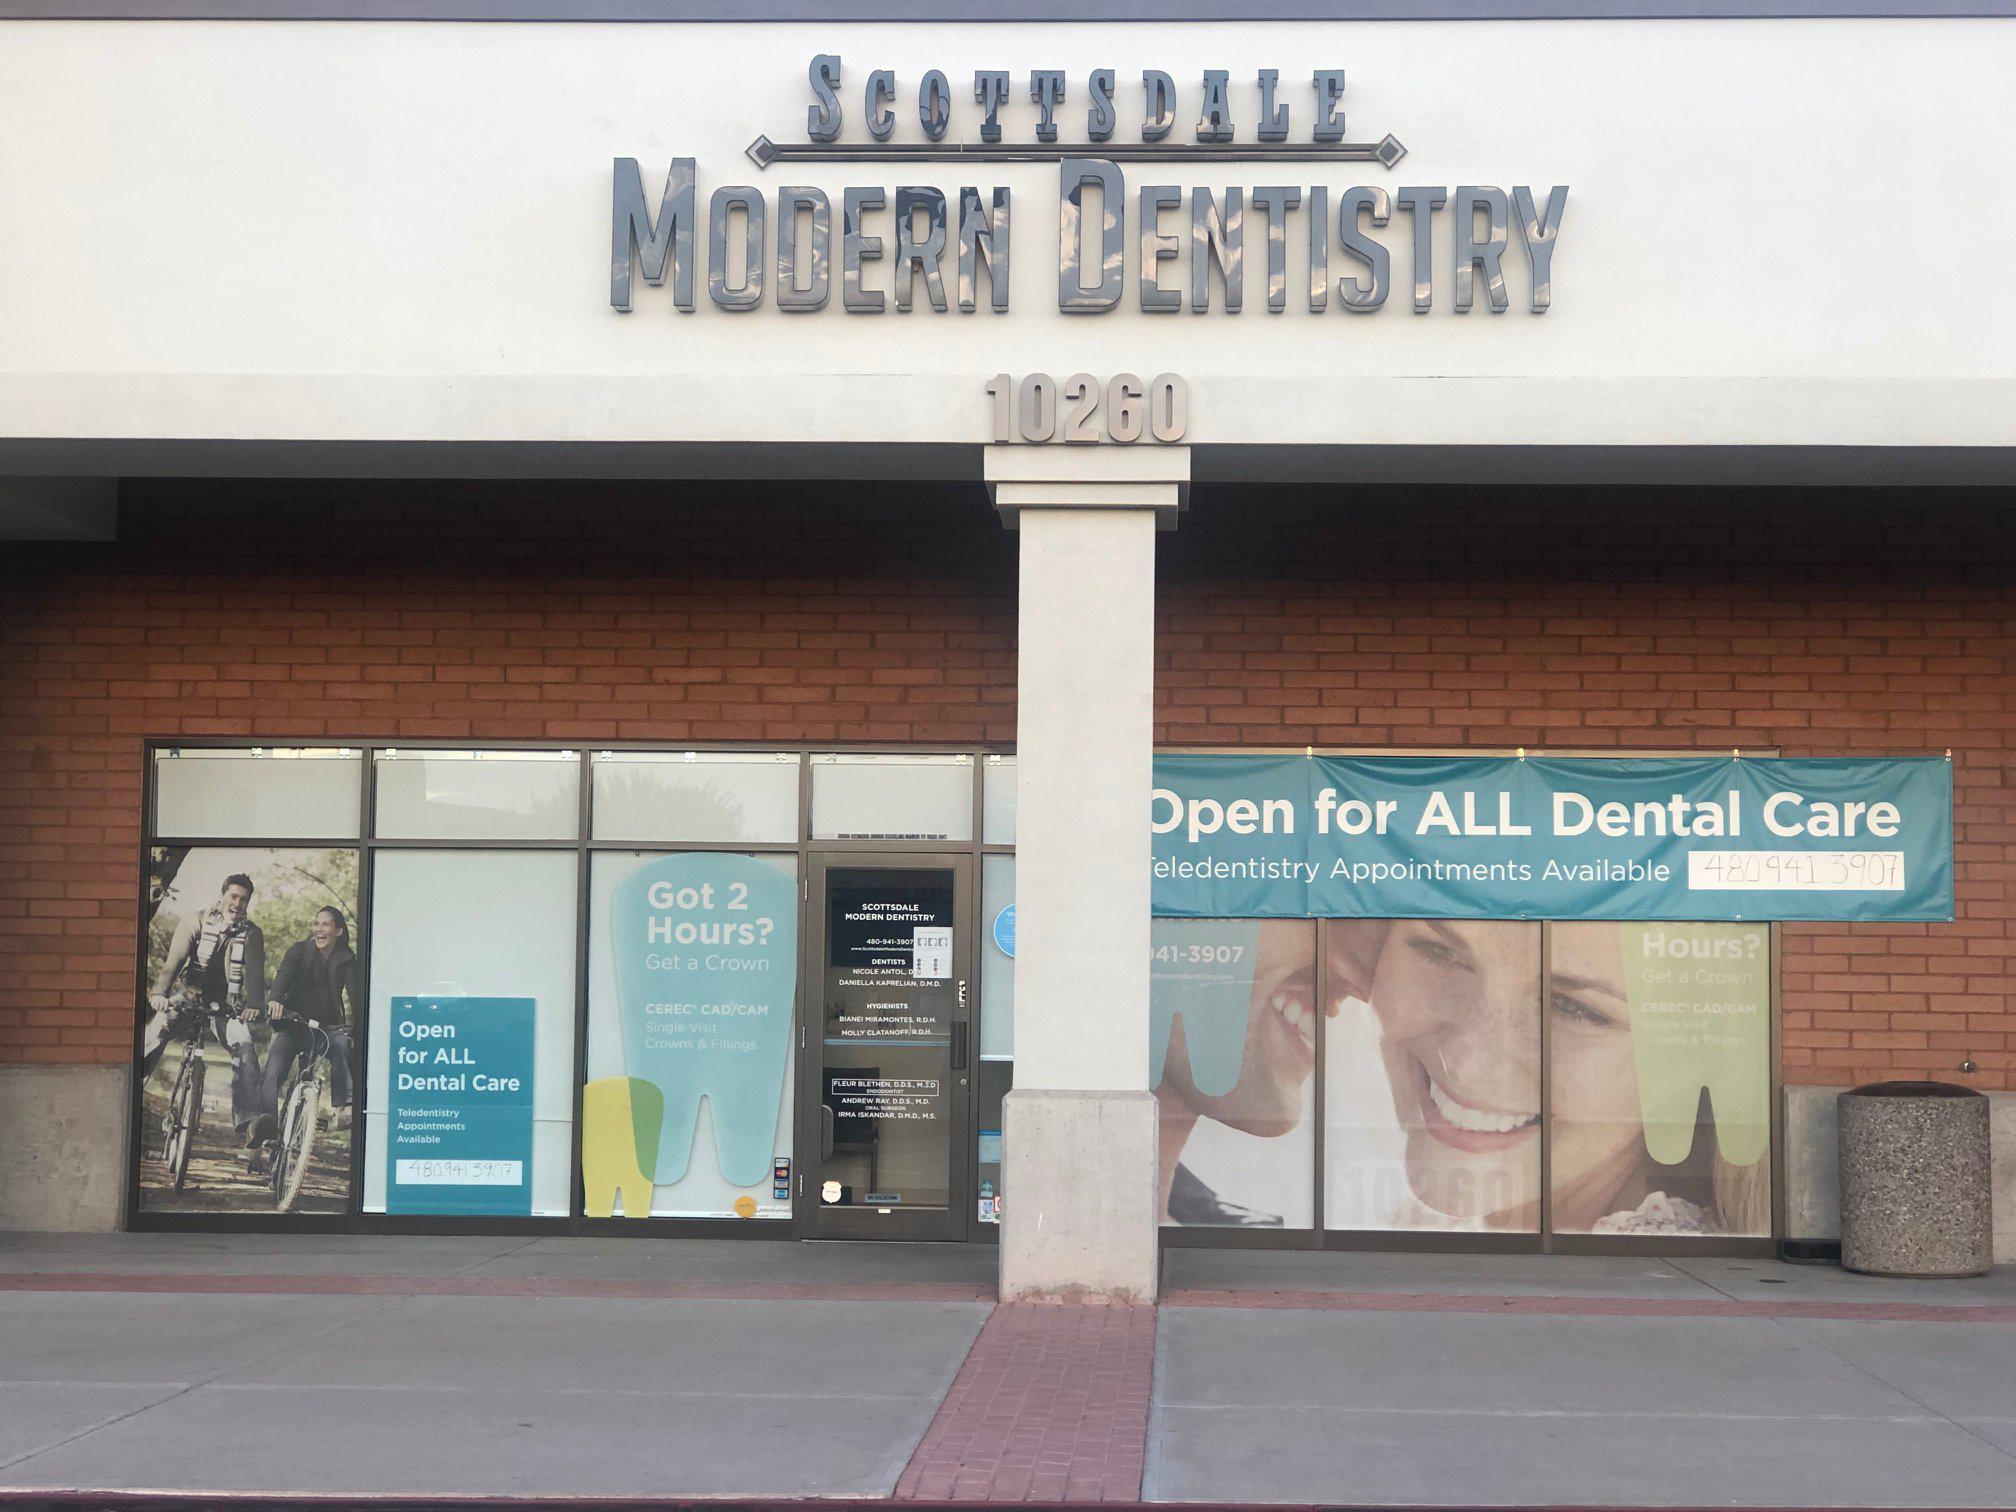 Looking for a family dentist in Scottsdale, AZ? You have come to the right spot! Scottsdale Modern Dentistry Scottsdale (480)941-3907